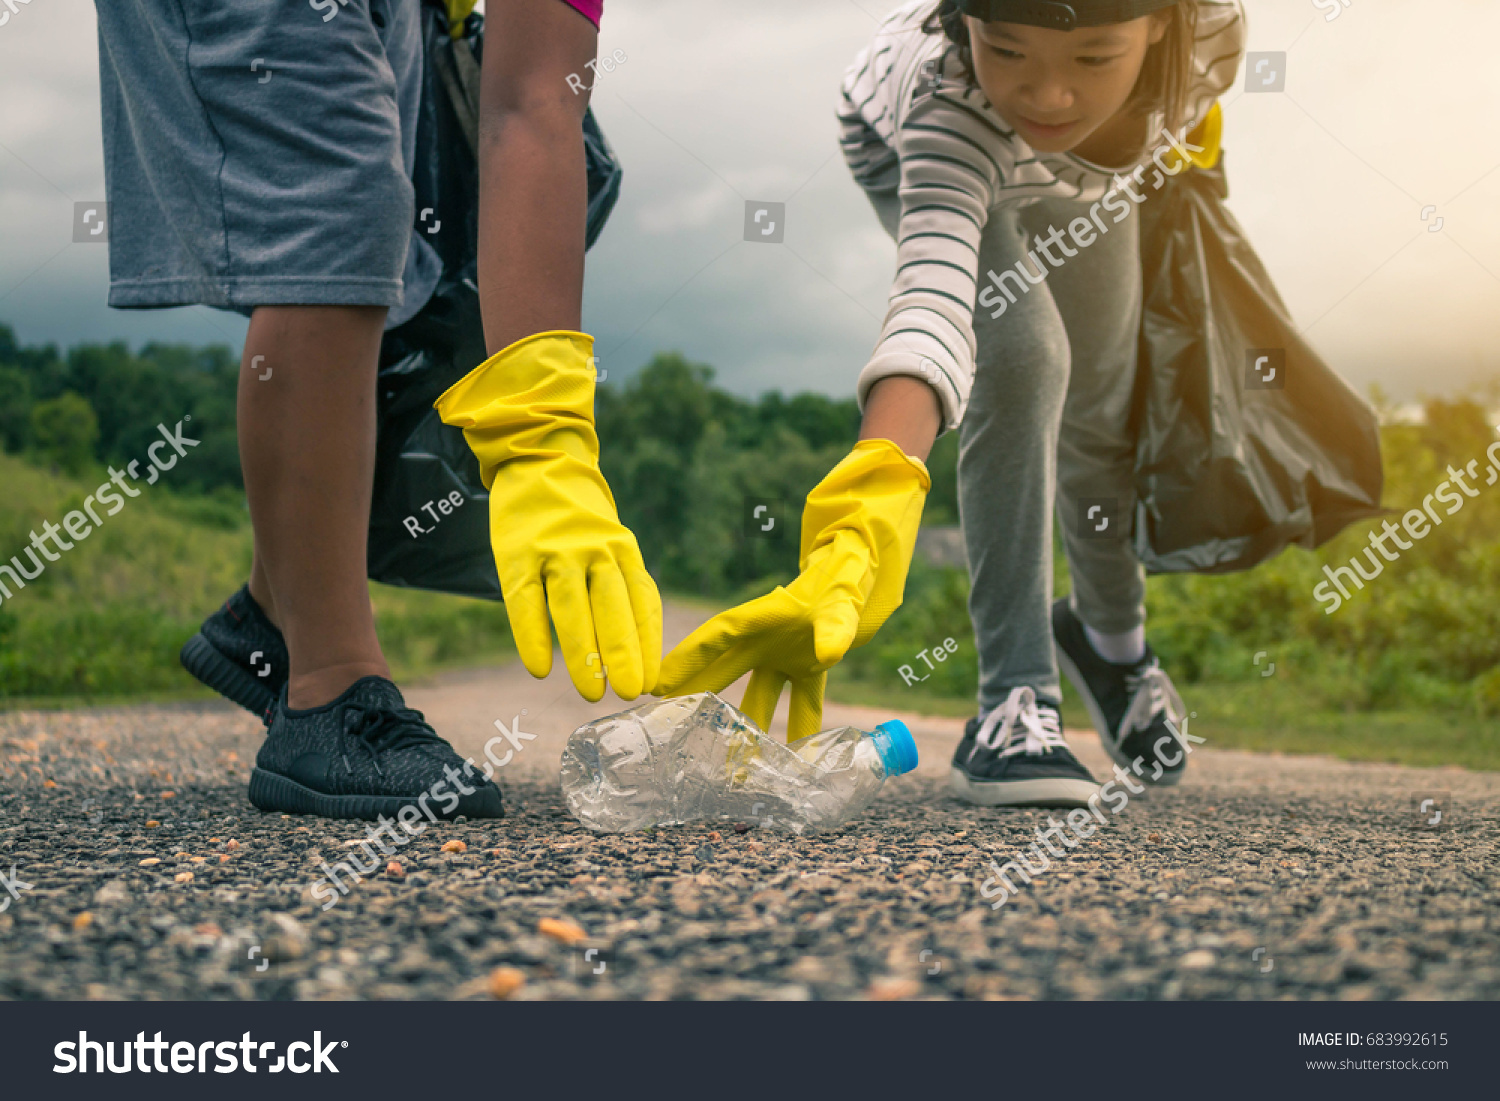 Group of kids volunteer help garbage collection charity environment. #683992615